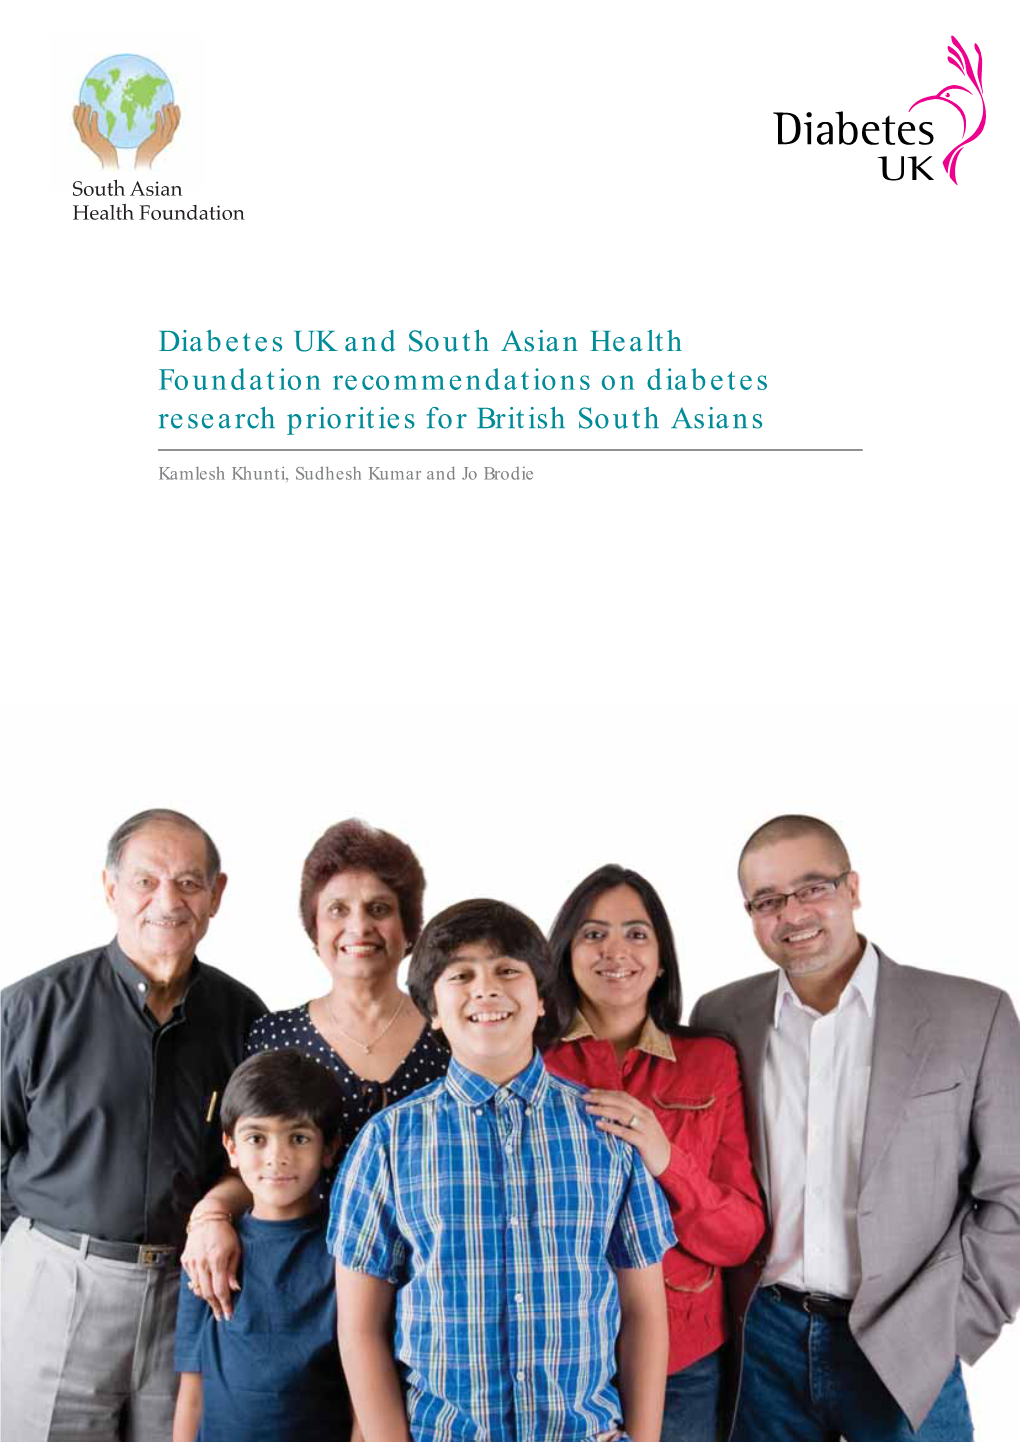 Diabetes UK and South Asian Health Foundation Recommendations on Diabetes Research Priorities for British South Asians